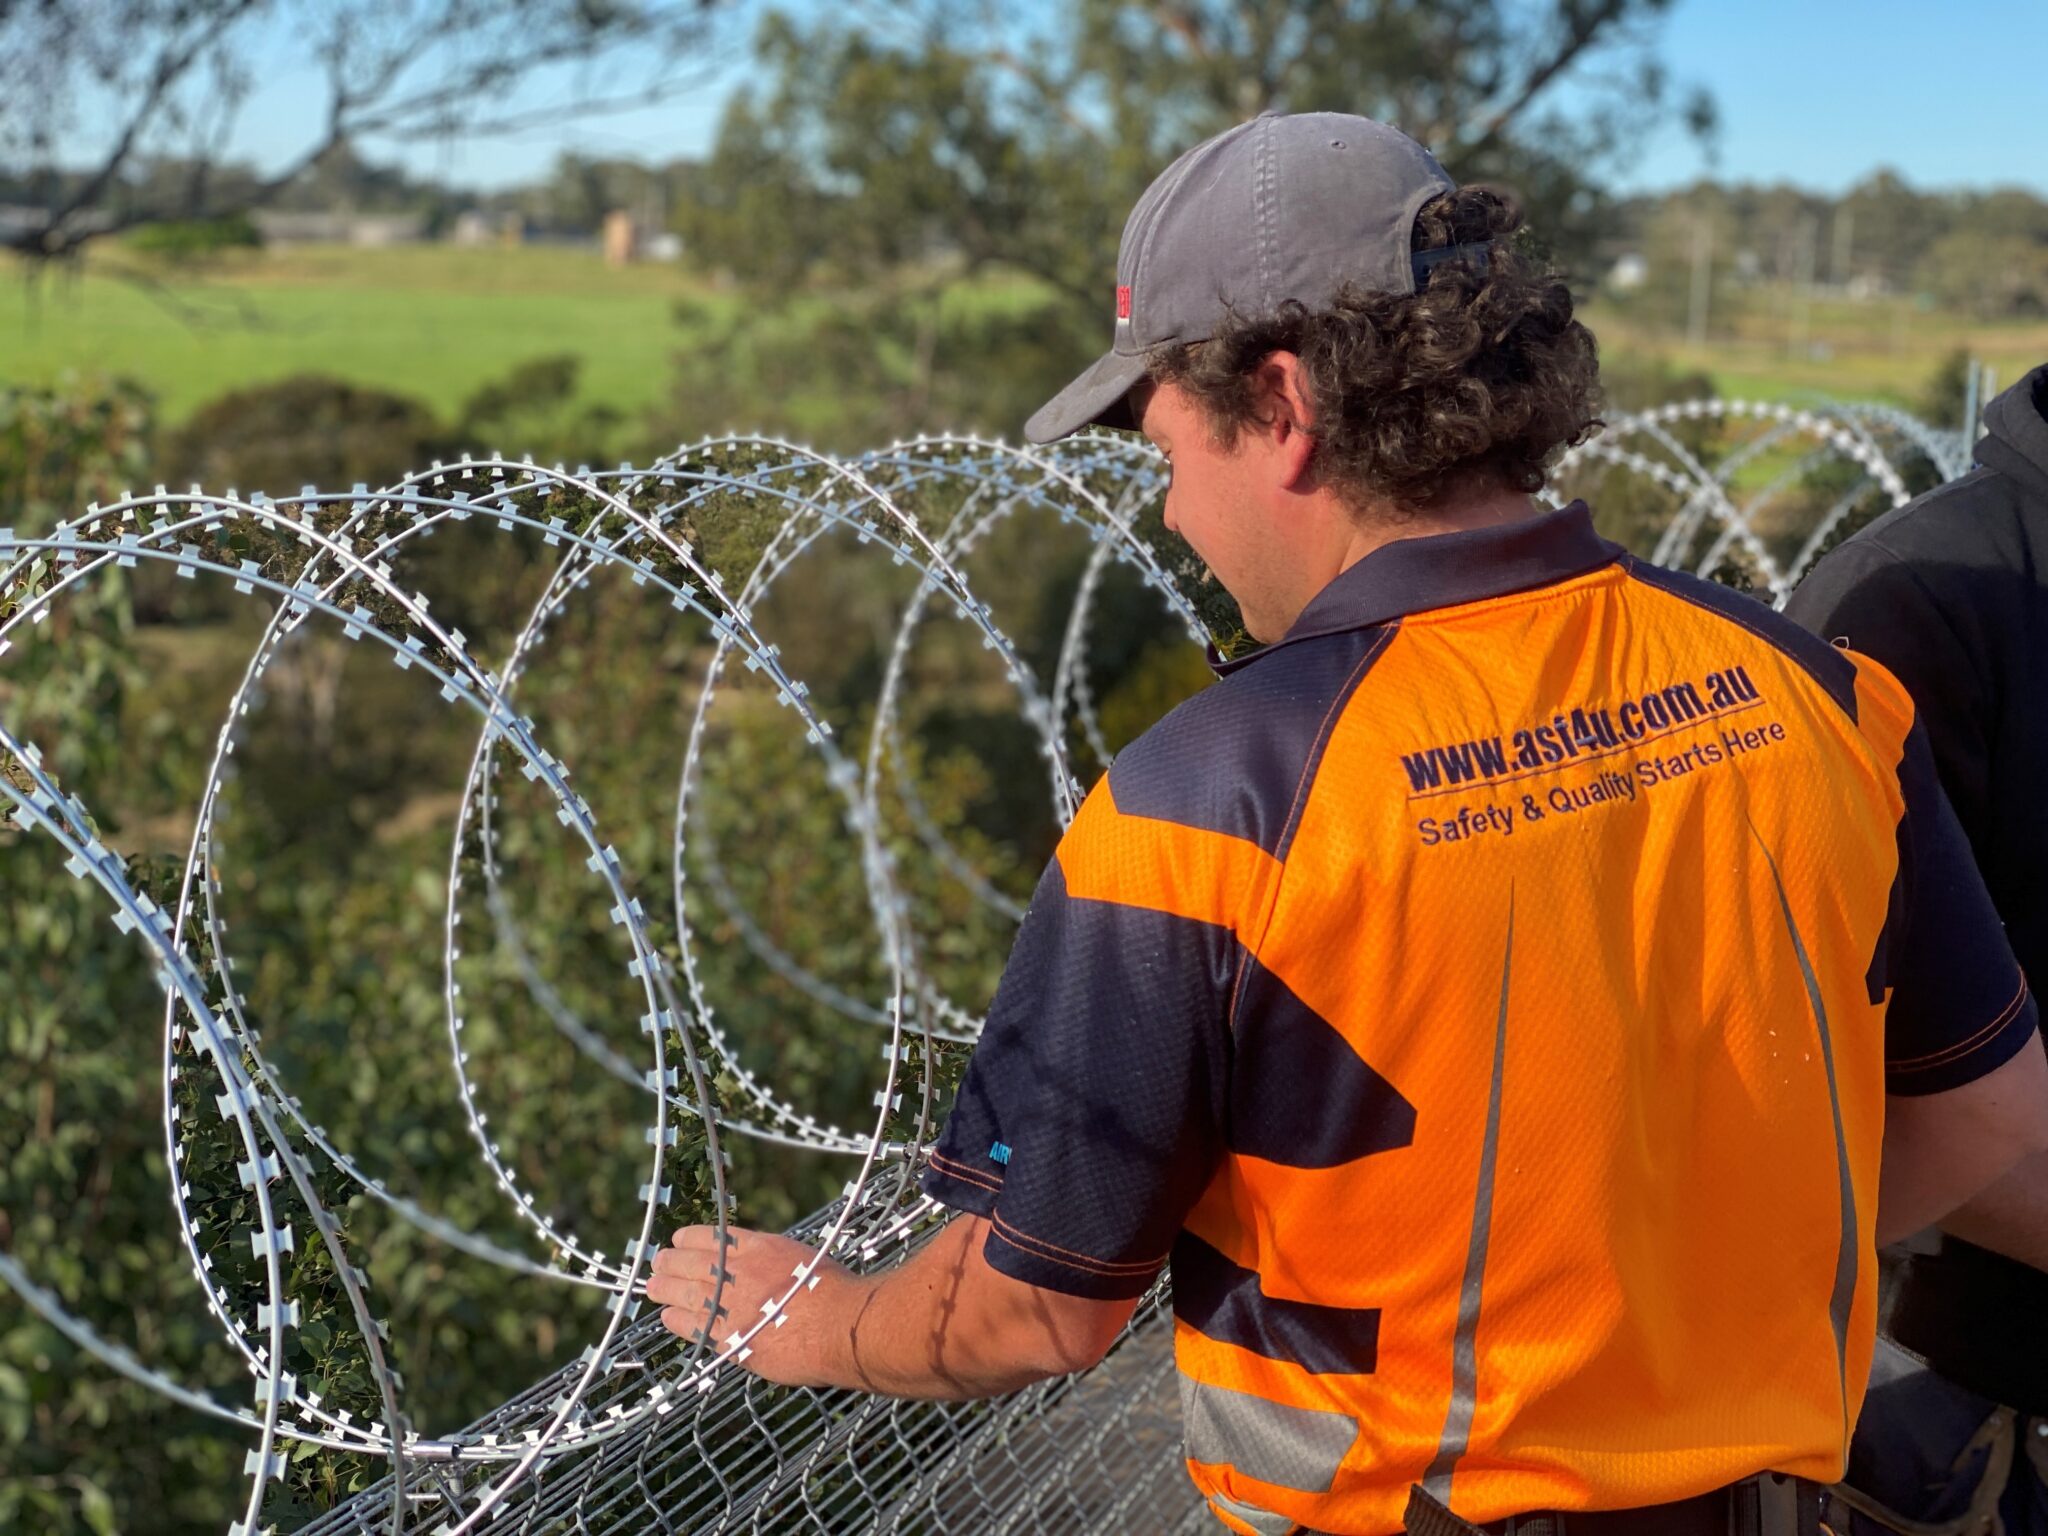 Razar Tape® Security Fencing, Barbed Tape or Razor Wire is fabricated with razor sharp steel blades and installed by Australian Security Fencing